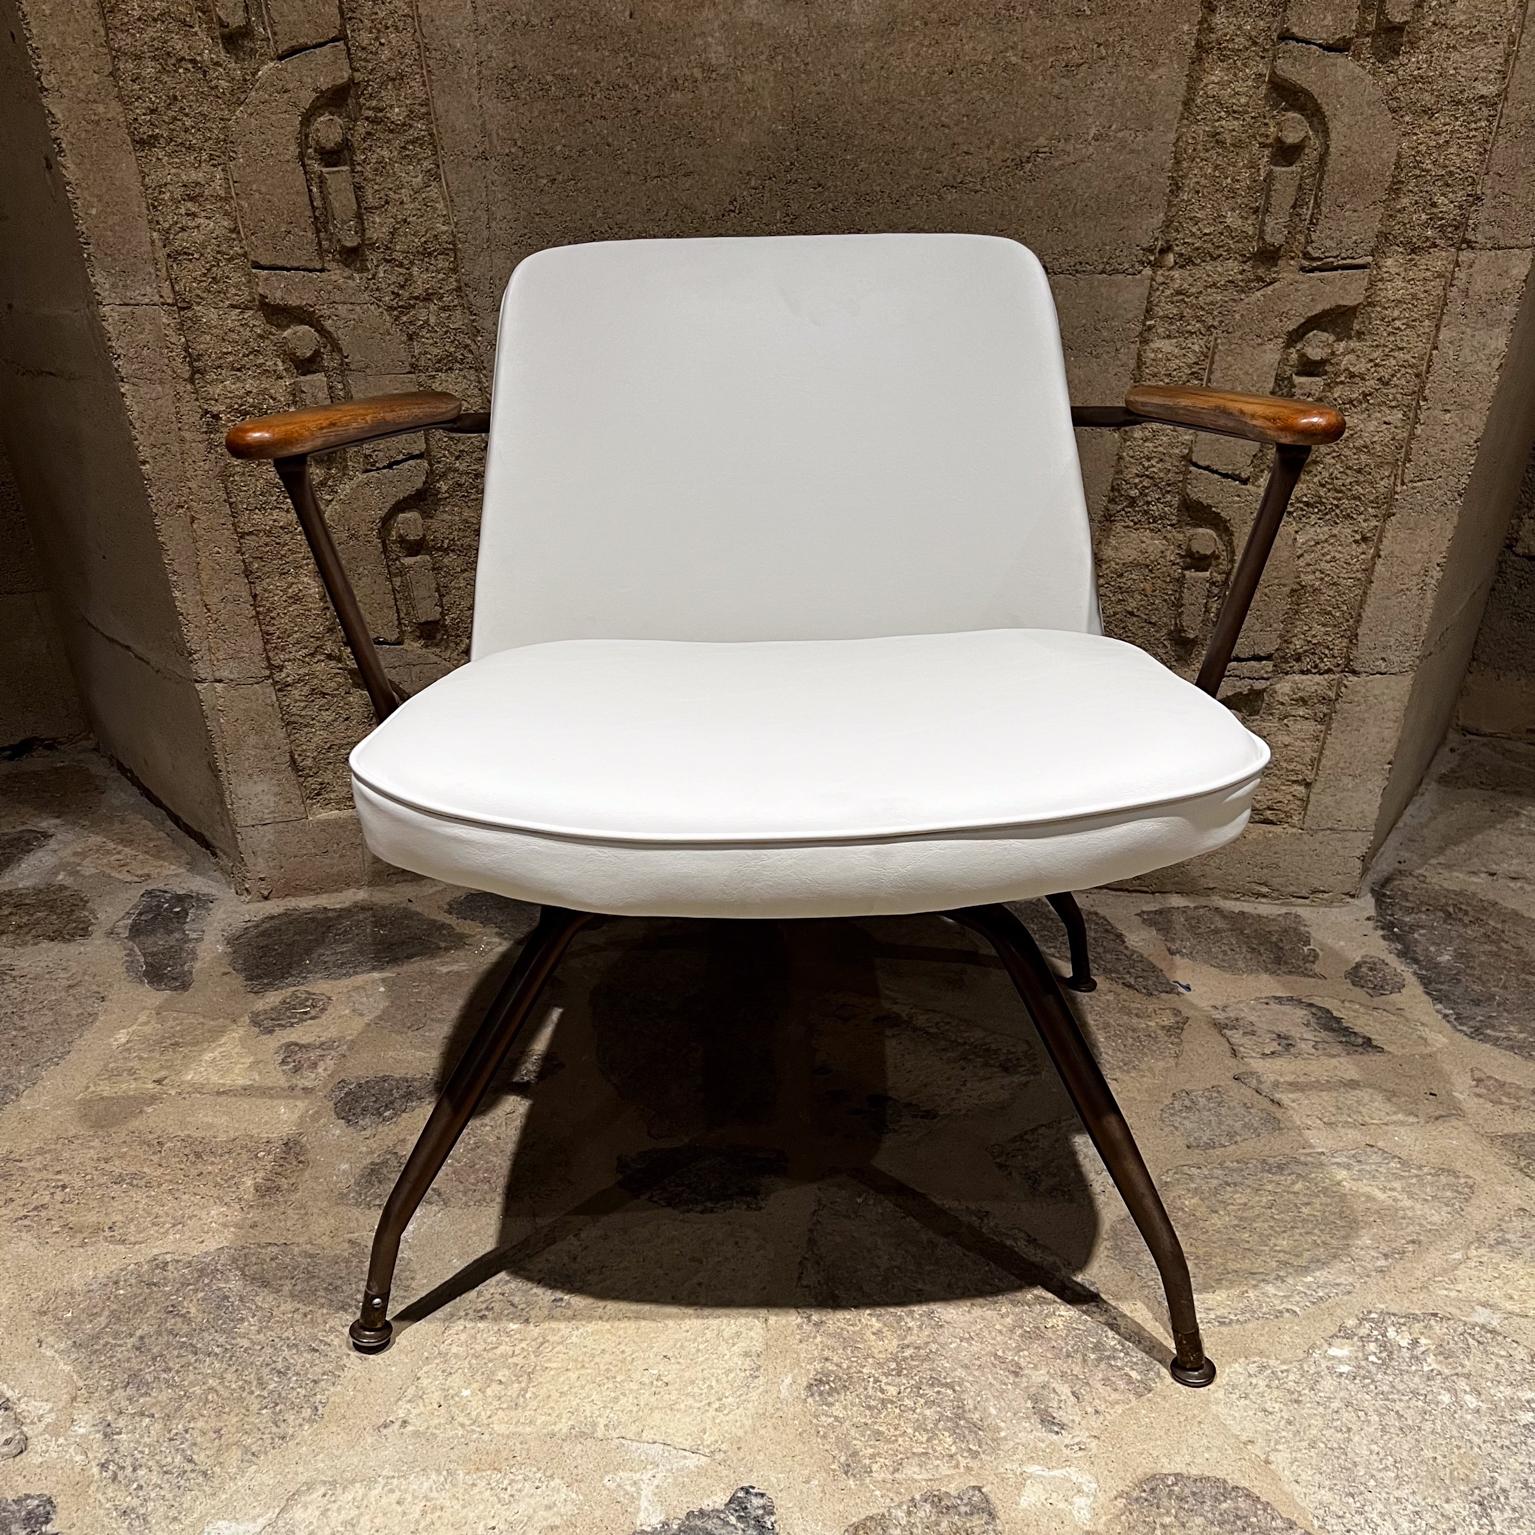 1950s Fabulous White Swivel Chair 
after Viko Baumritter
Stamped MODEL19 May 1959 Memphis Tenn
27.5 h x 27.5 w x 25.25 d seat15.25 h arm rest 23 h
Original unrestored vintage condition
See all images provided.